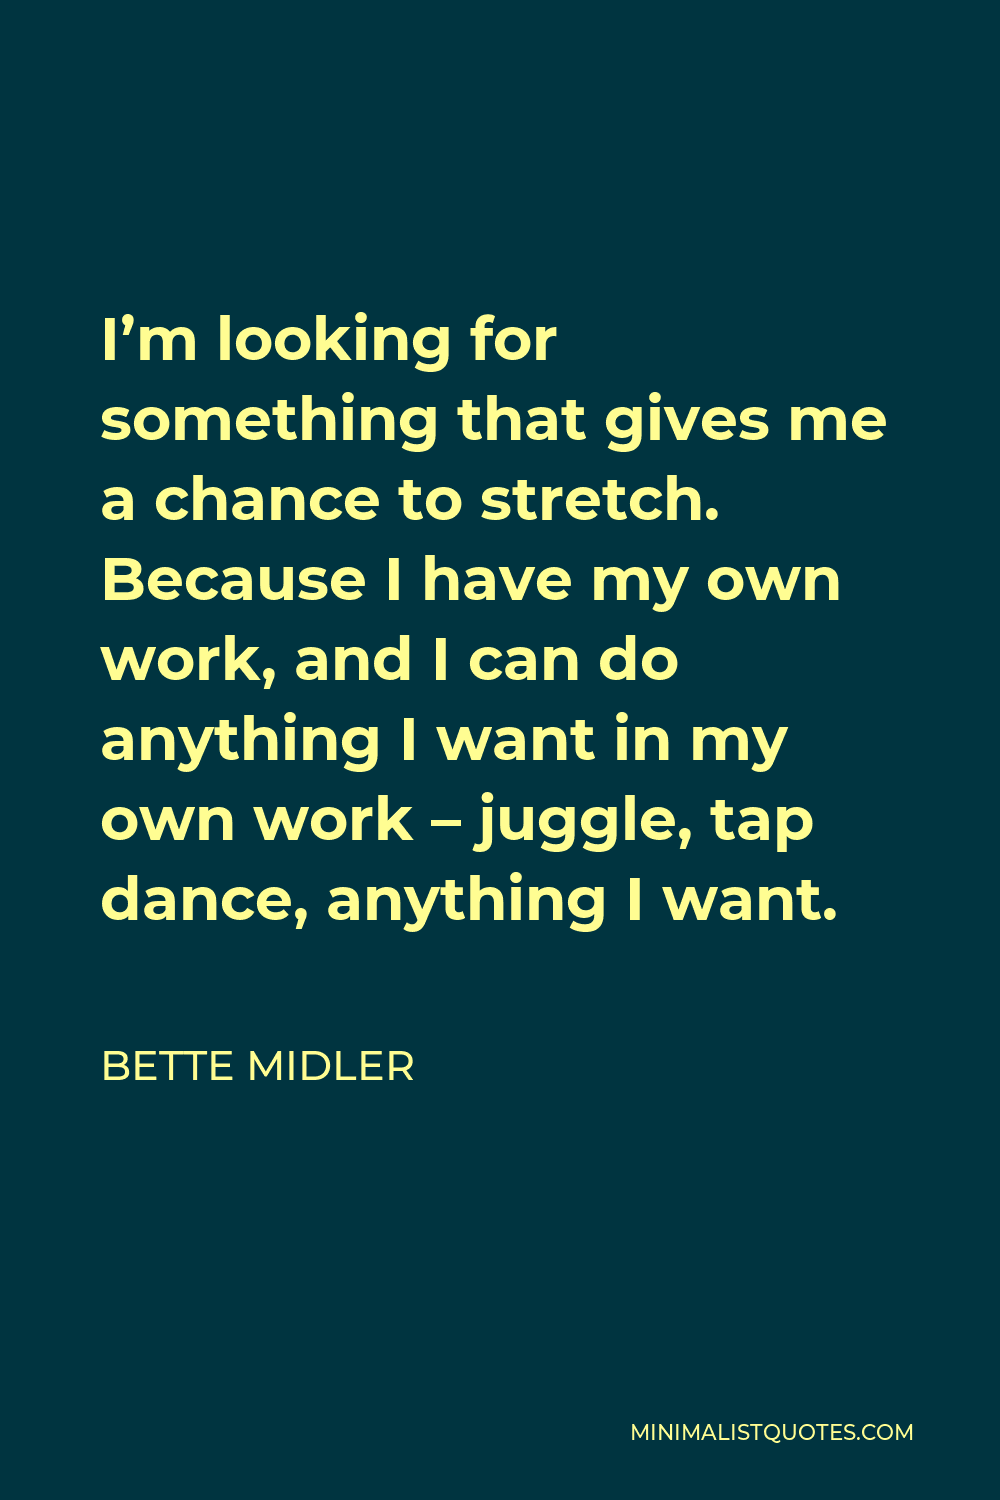 Bette Midler Quote - I’m looking for something that gives me a chance to stretch. Because I have my own work, and I can do anything I want in my own work – juggle, tap dance, anything I want.